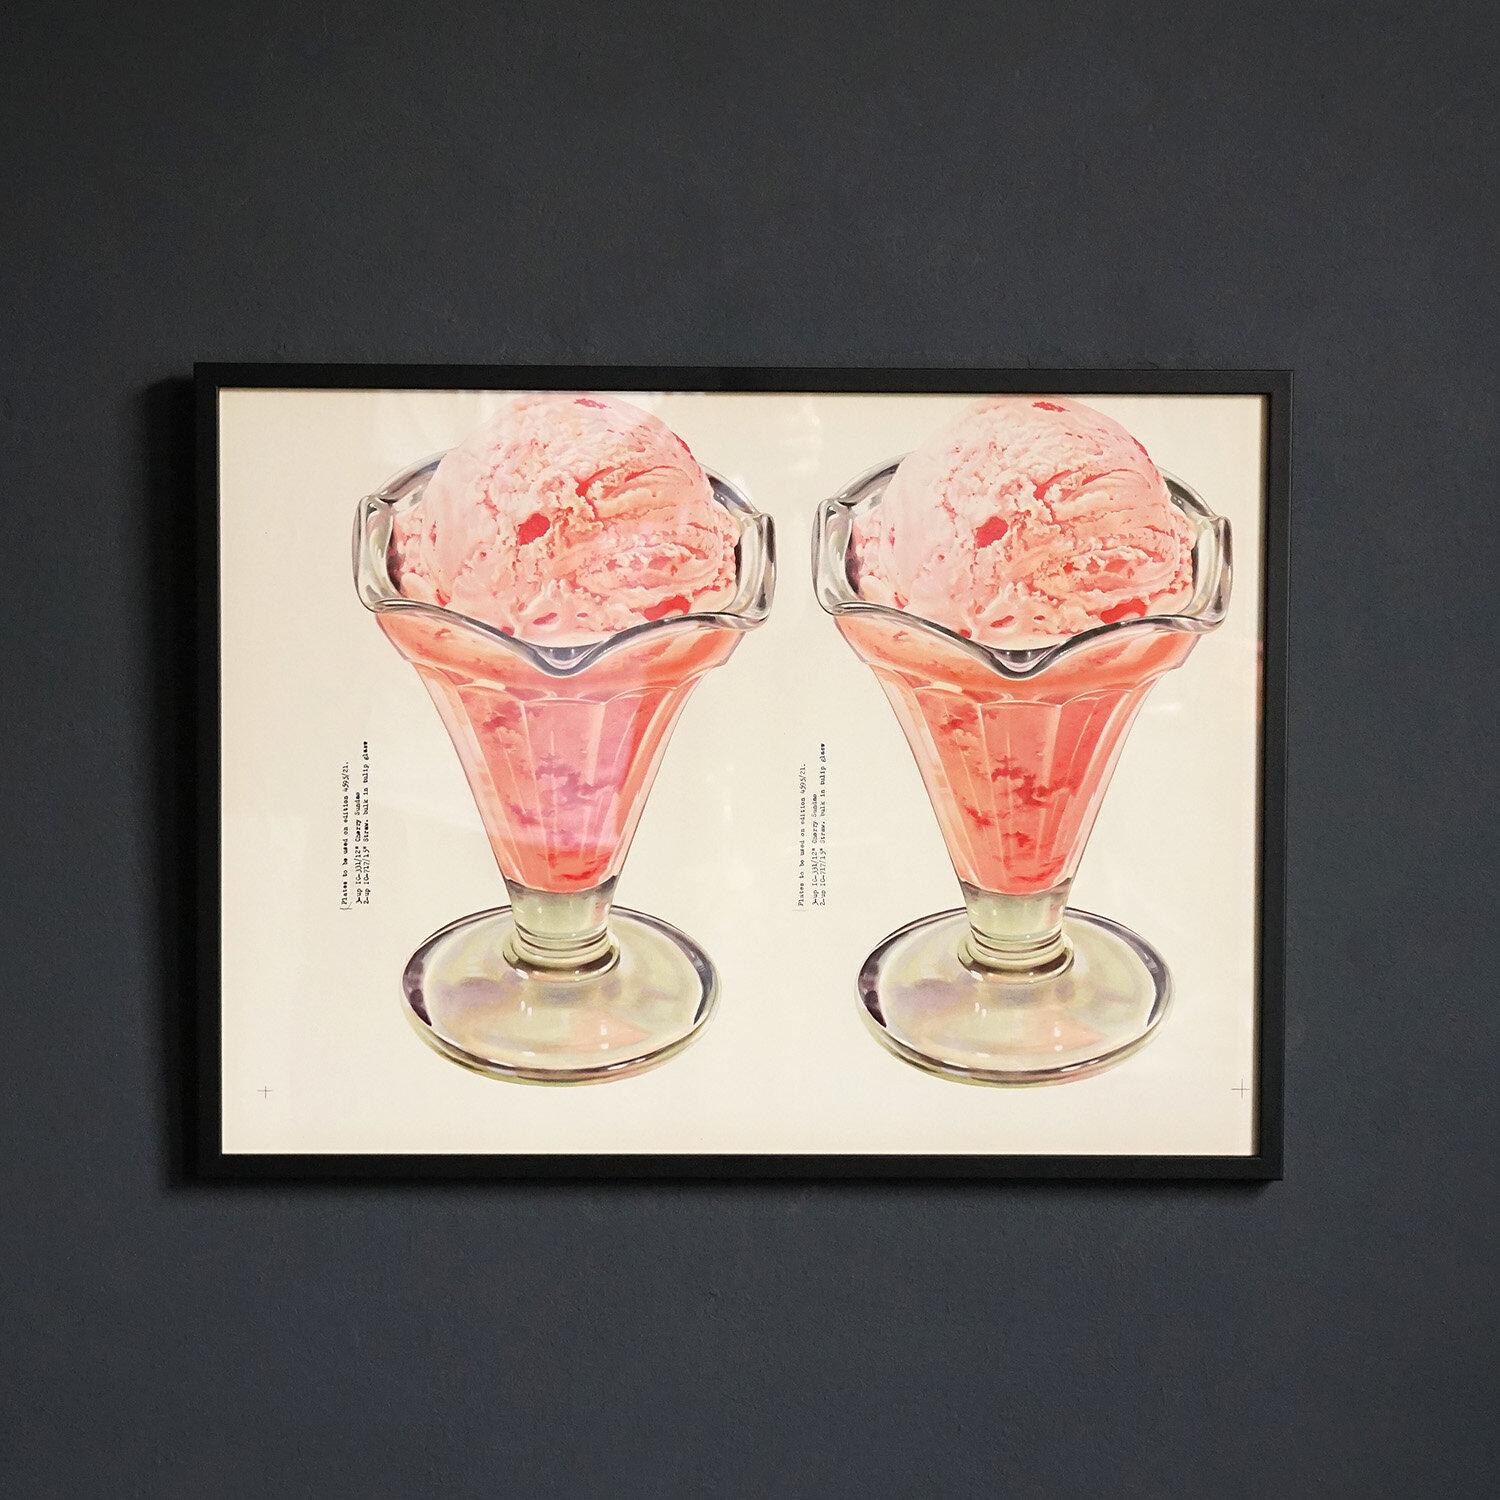 Midcentury ice cream prints.
Originally made for advertising purposes in American diners. 

Printed by the Weiler Printing Co, Philadelphia.

It is in very good vintage condition with only minor wear and tear.

Professionally framed in simple